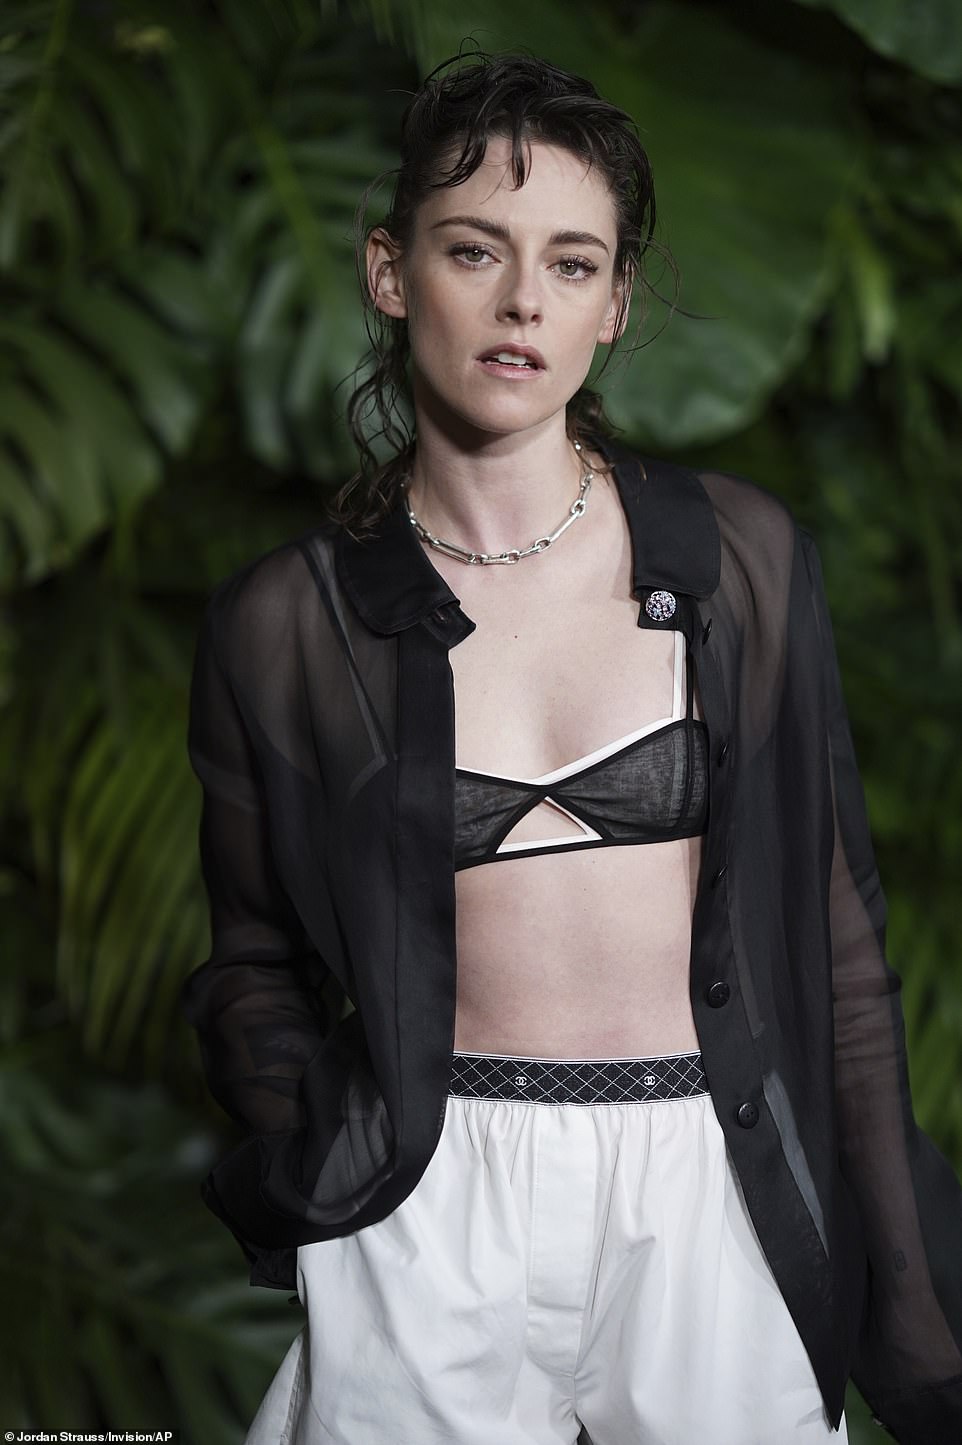 The actress donned a black and white bralette top, as well as a pair of white shorts from the luxury brand that contained black trim around the waist.